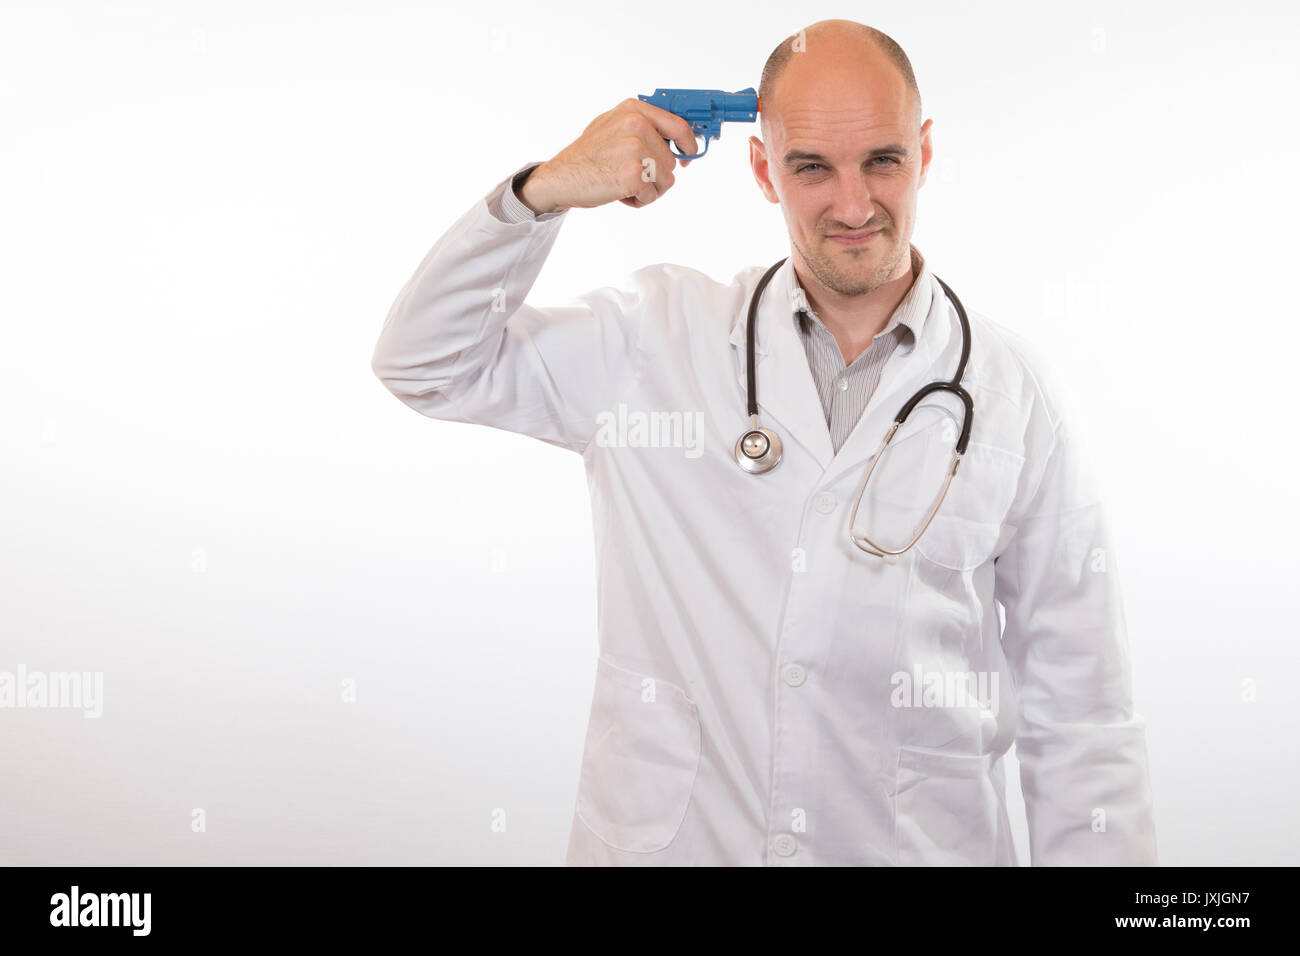 Suicidal doctor under stress from overwork holding a toy plastic gun to his head in a conceptual image Stock Photo